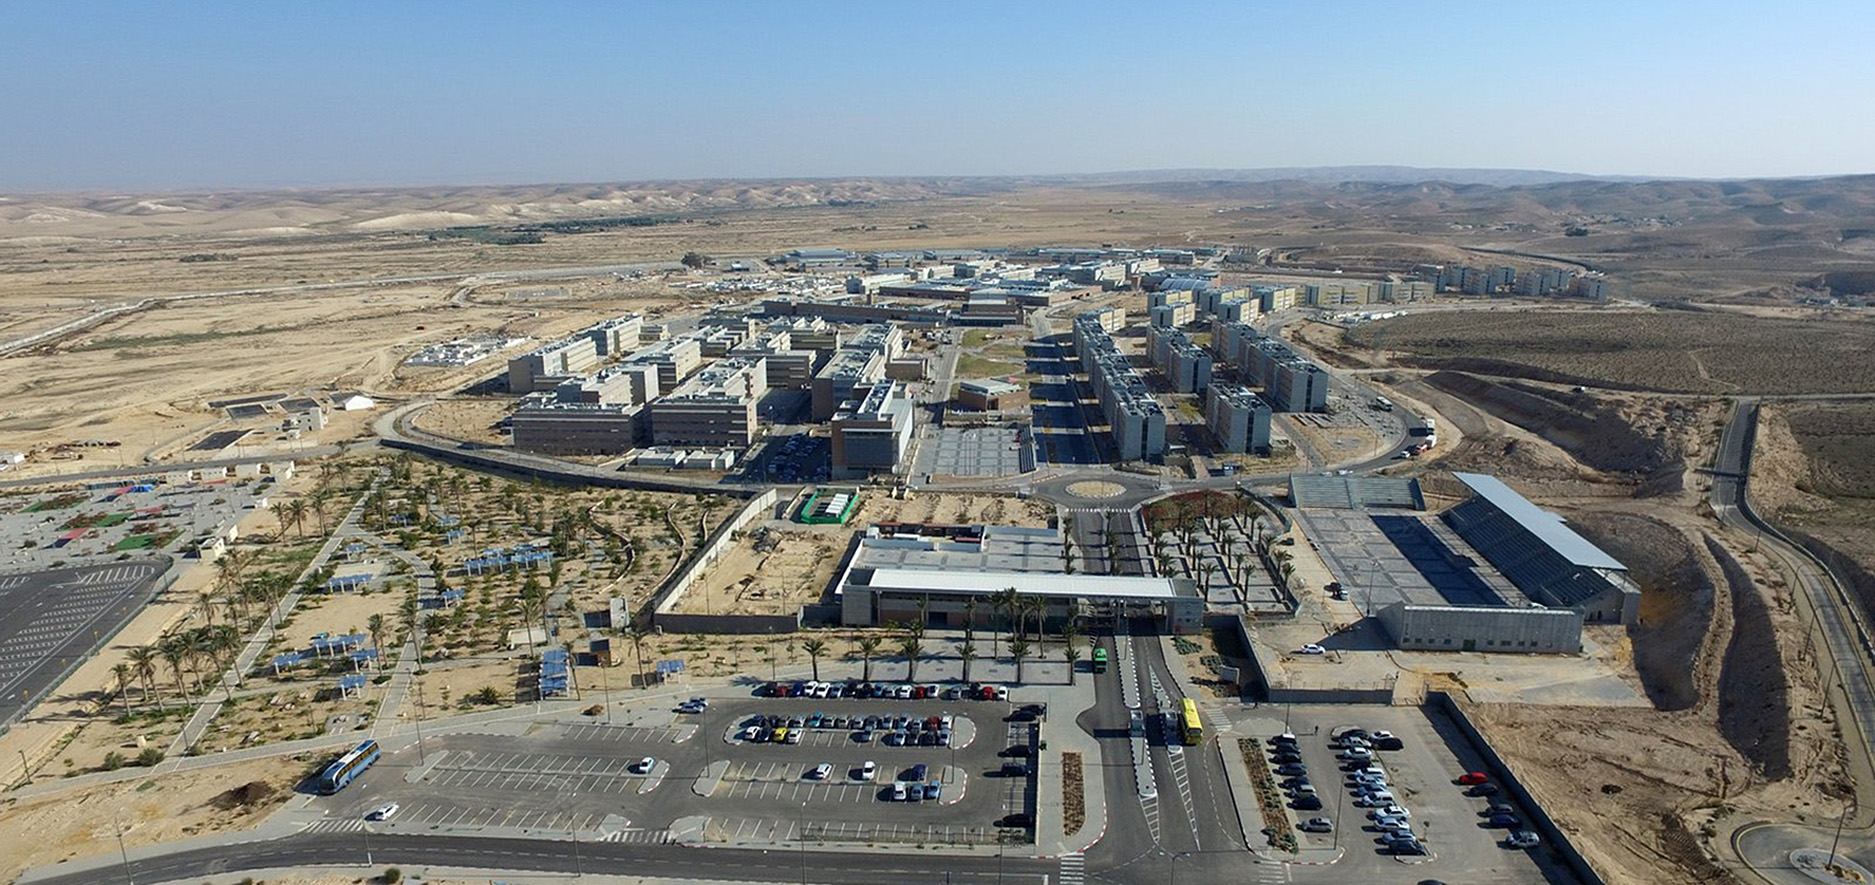 The IDF training campus was planned by Kolker Epstein